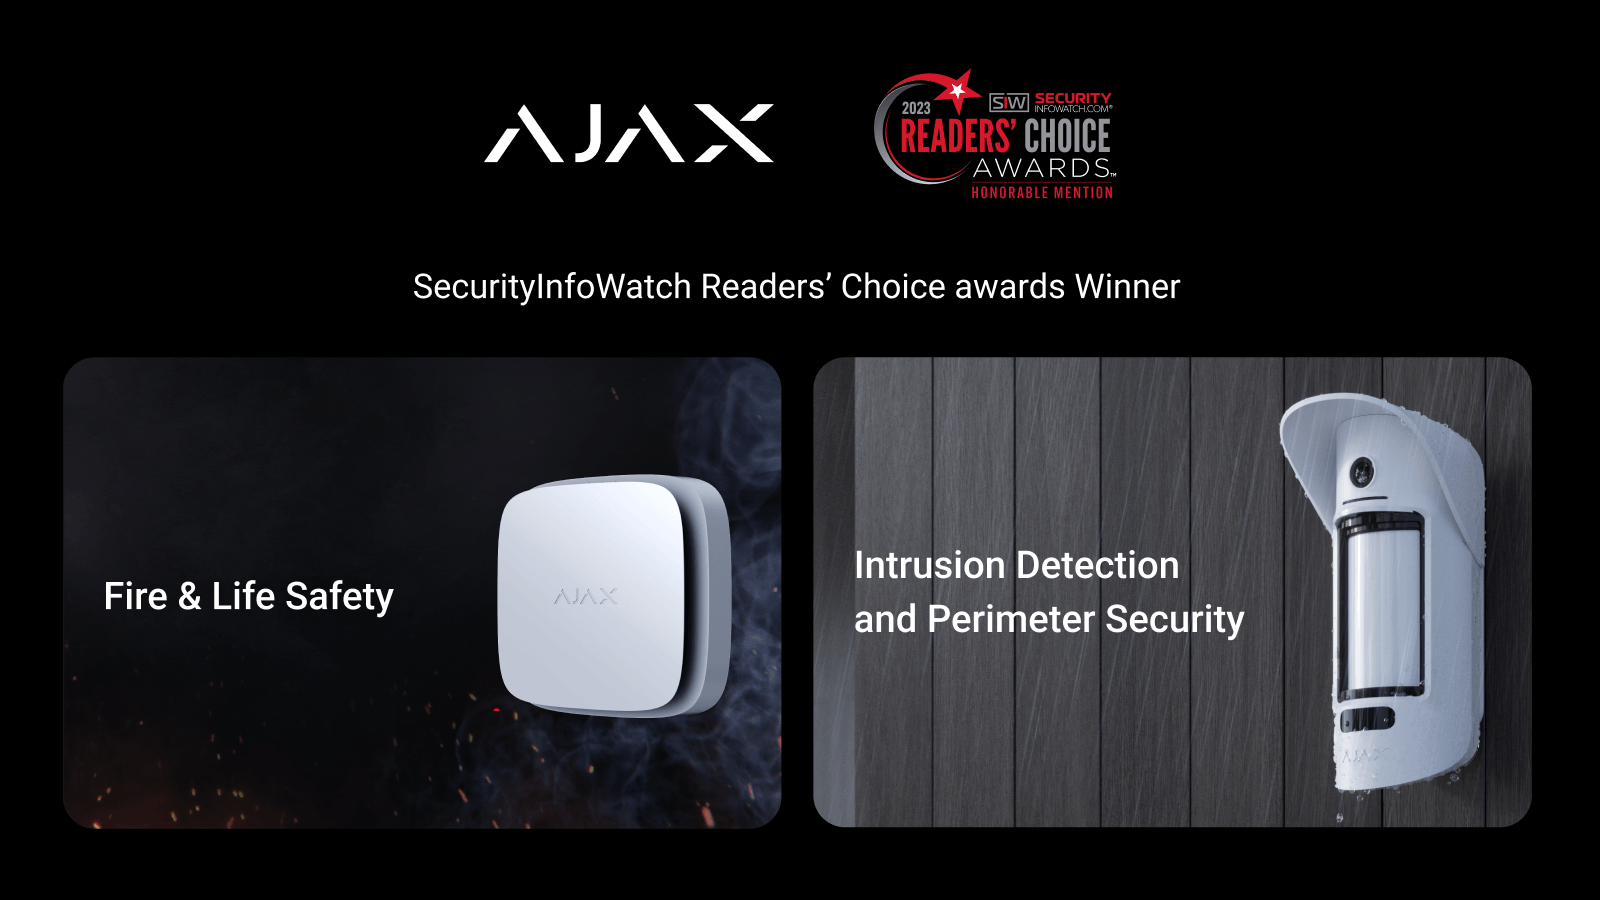 Ajax Systems wins 2 categories at the SecurityInfoWatch.com Readers’ Choice Awards in the US